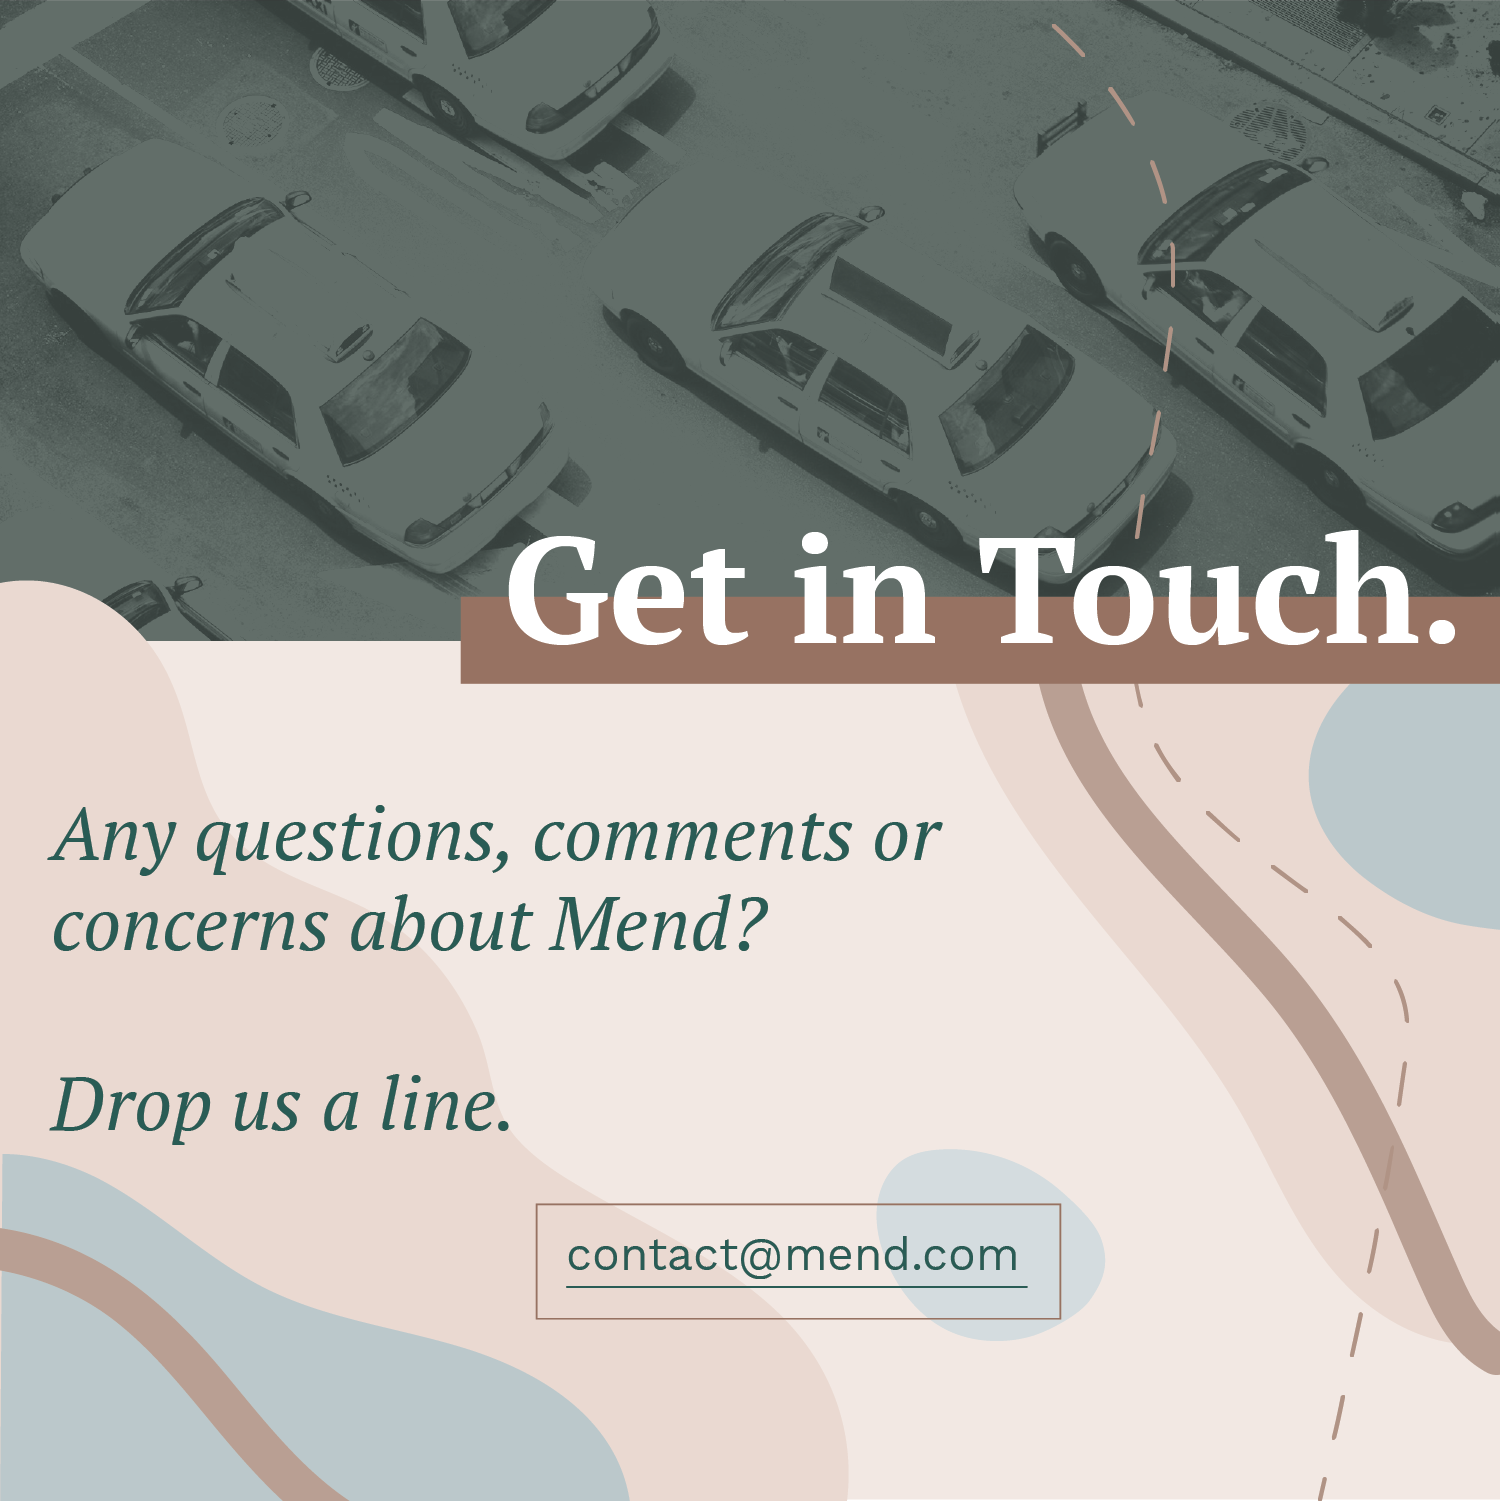 UI snapshot of a possible contact page direction. More illustration focused.